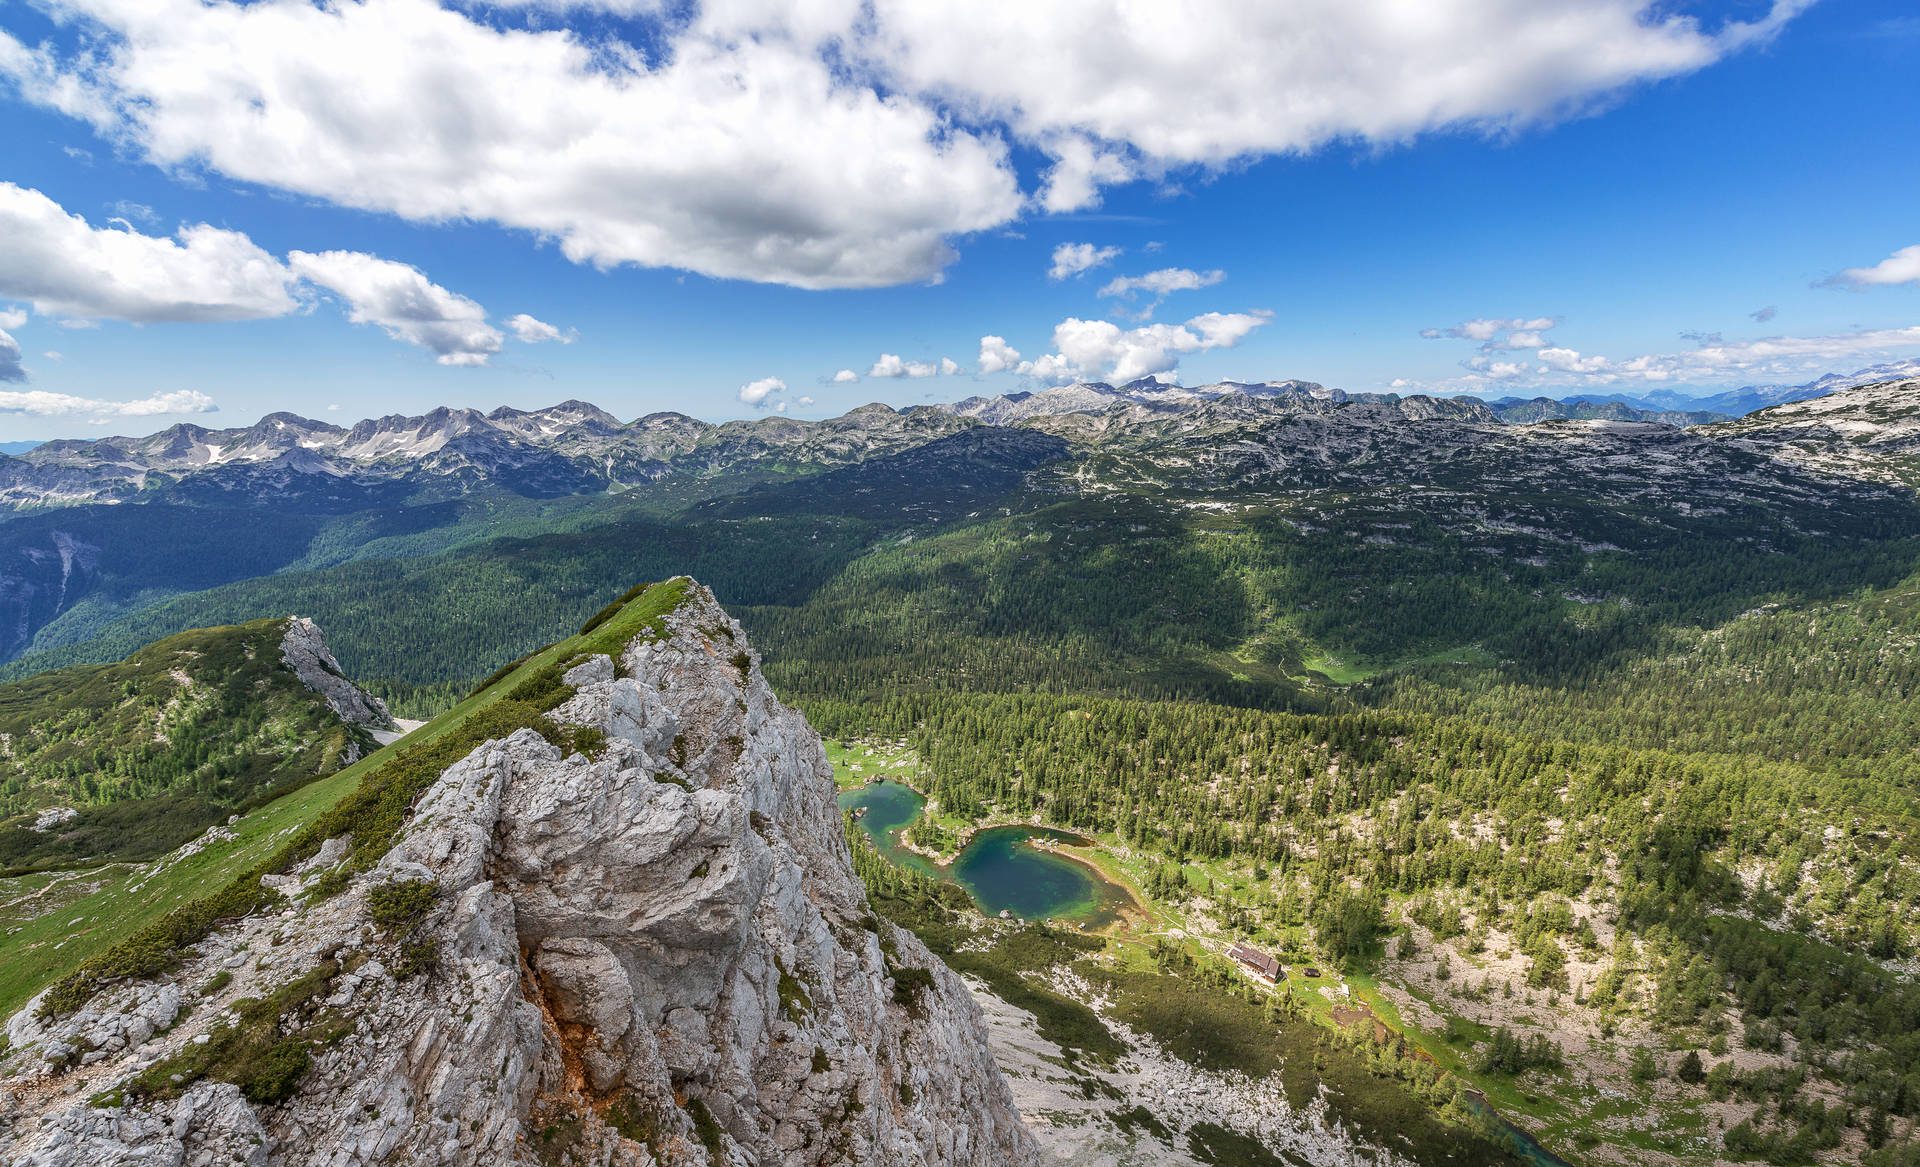 Mountainous_ Landscape_with_ Lakes_ Viewpoint.jpg SVG